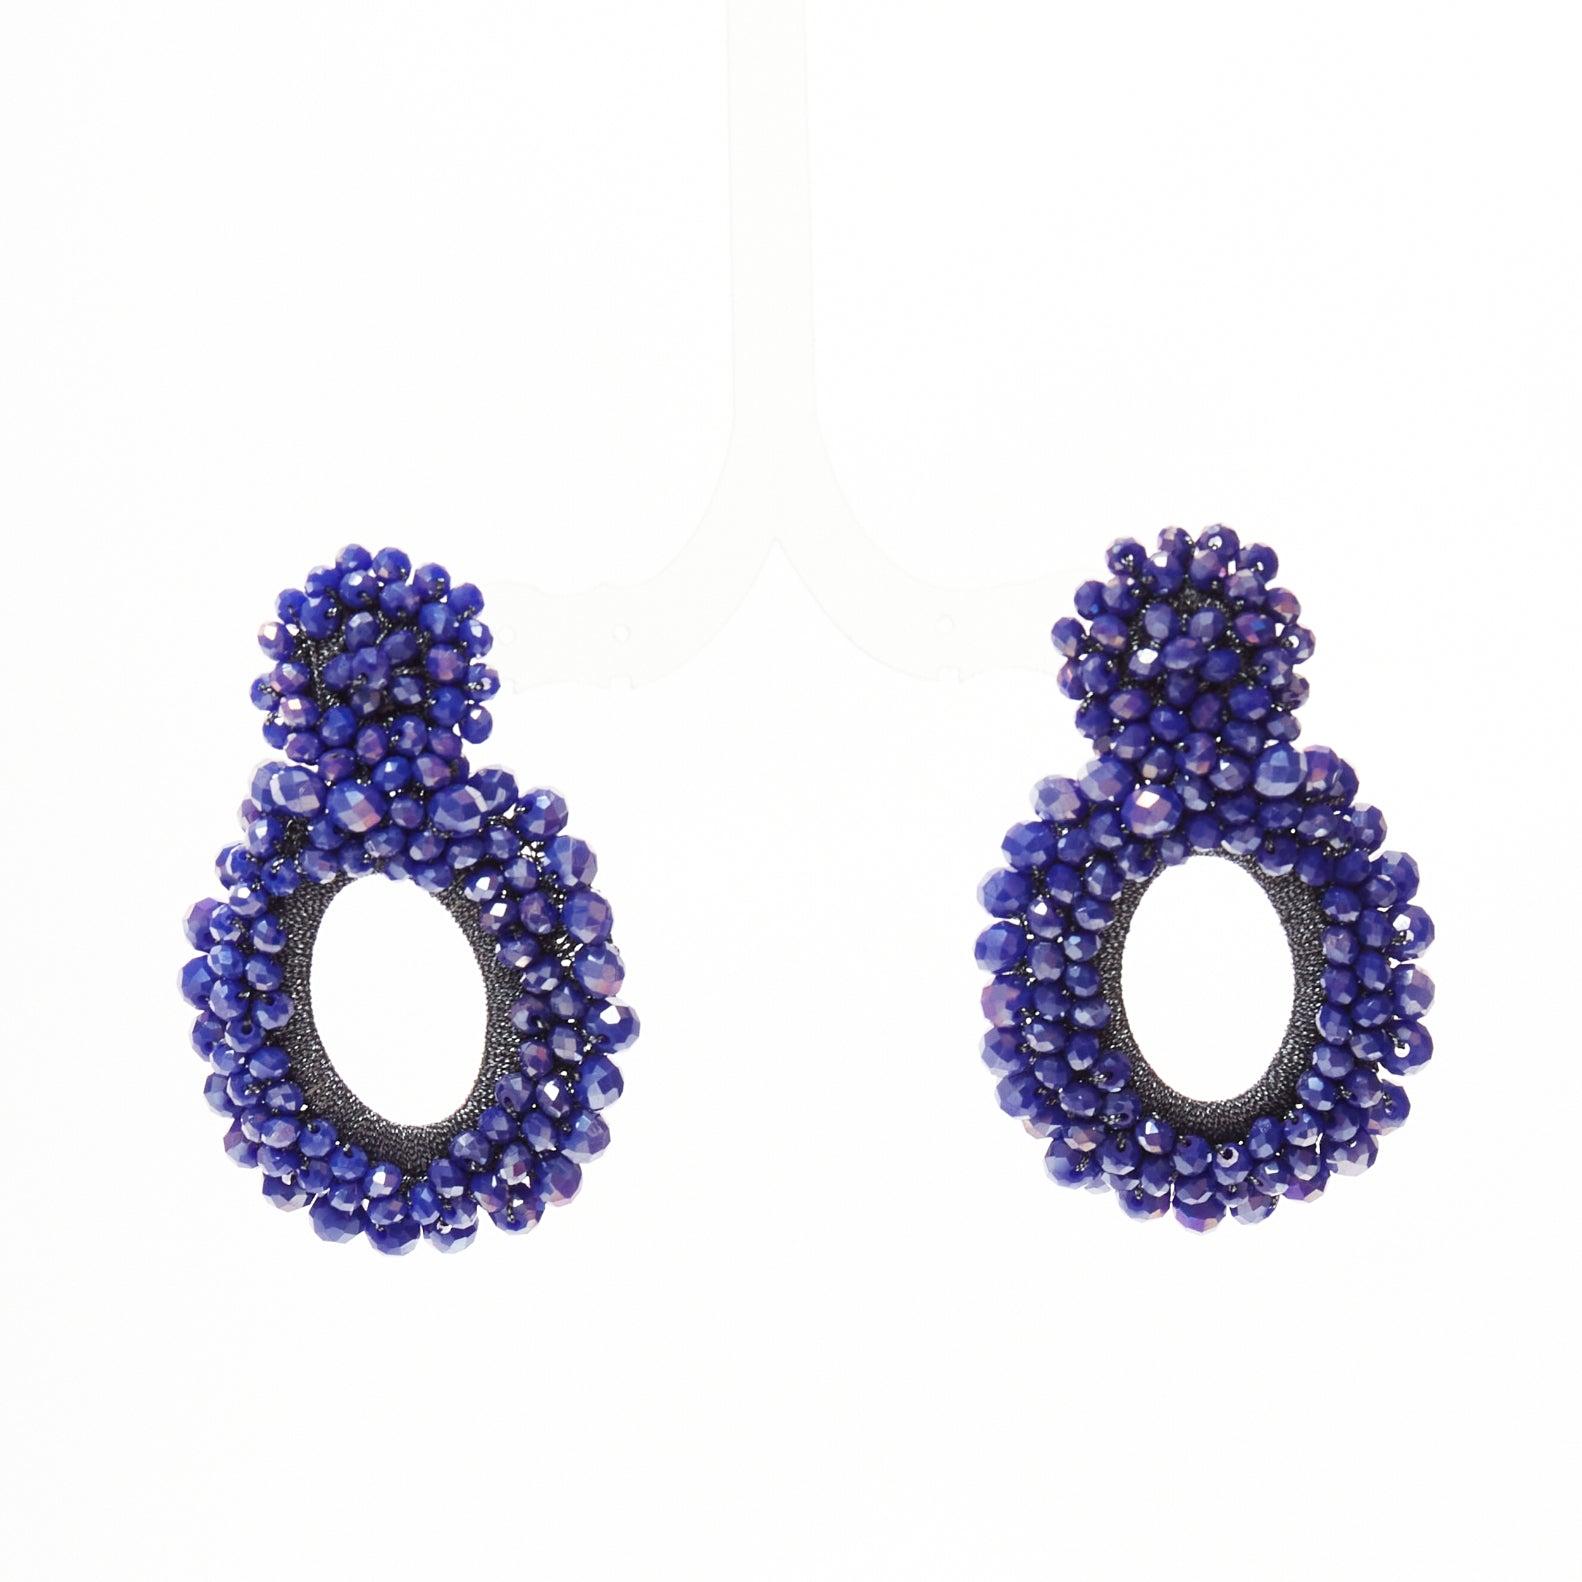 BIBI MARINI blue purple beaded lurex fabric hoop loop through earrings
Reference: AAWC/A01252
Brand: Bibi Marini
Material: Fabric
Color: Blue, Silver
Pattern: Solid
Closure: Loop Through
Lining: Silver Metal

CONDITION:
Condition: Excellent, this